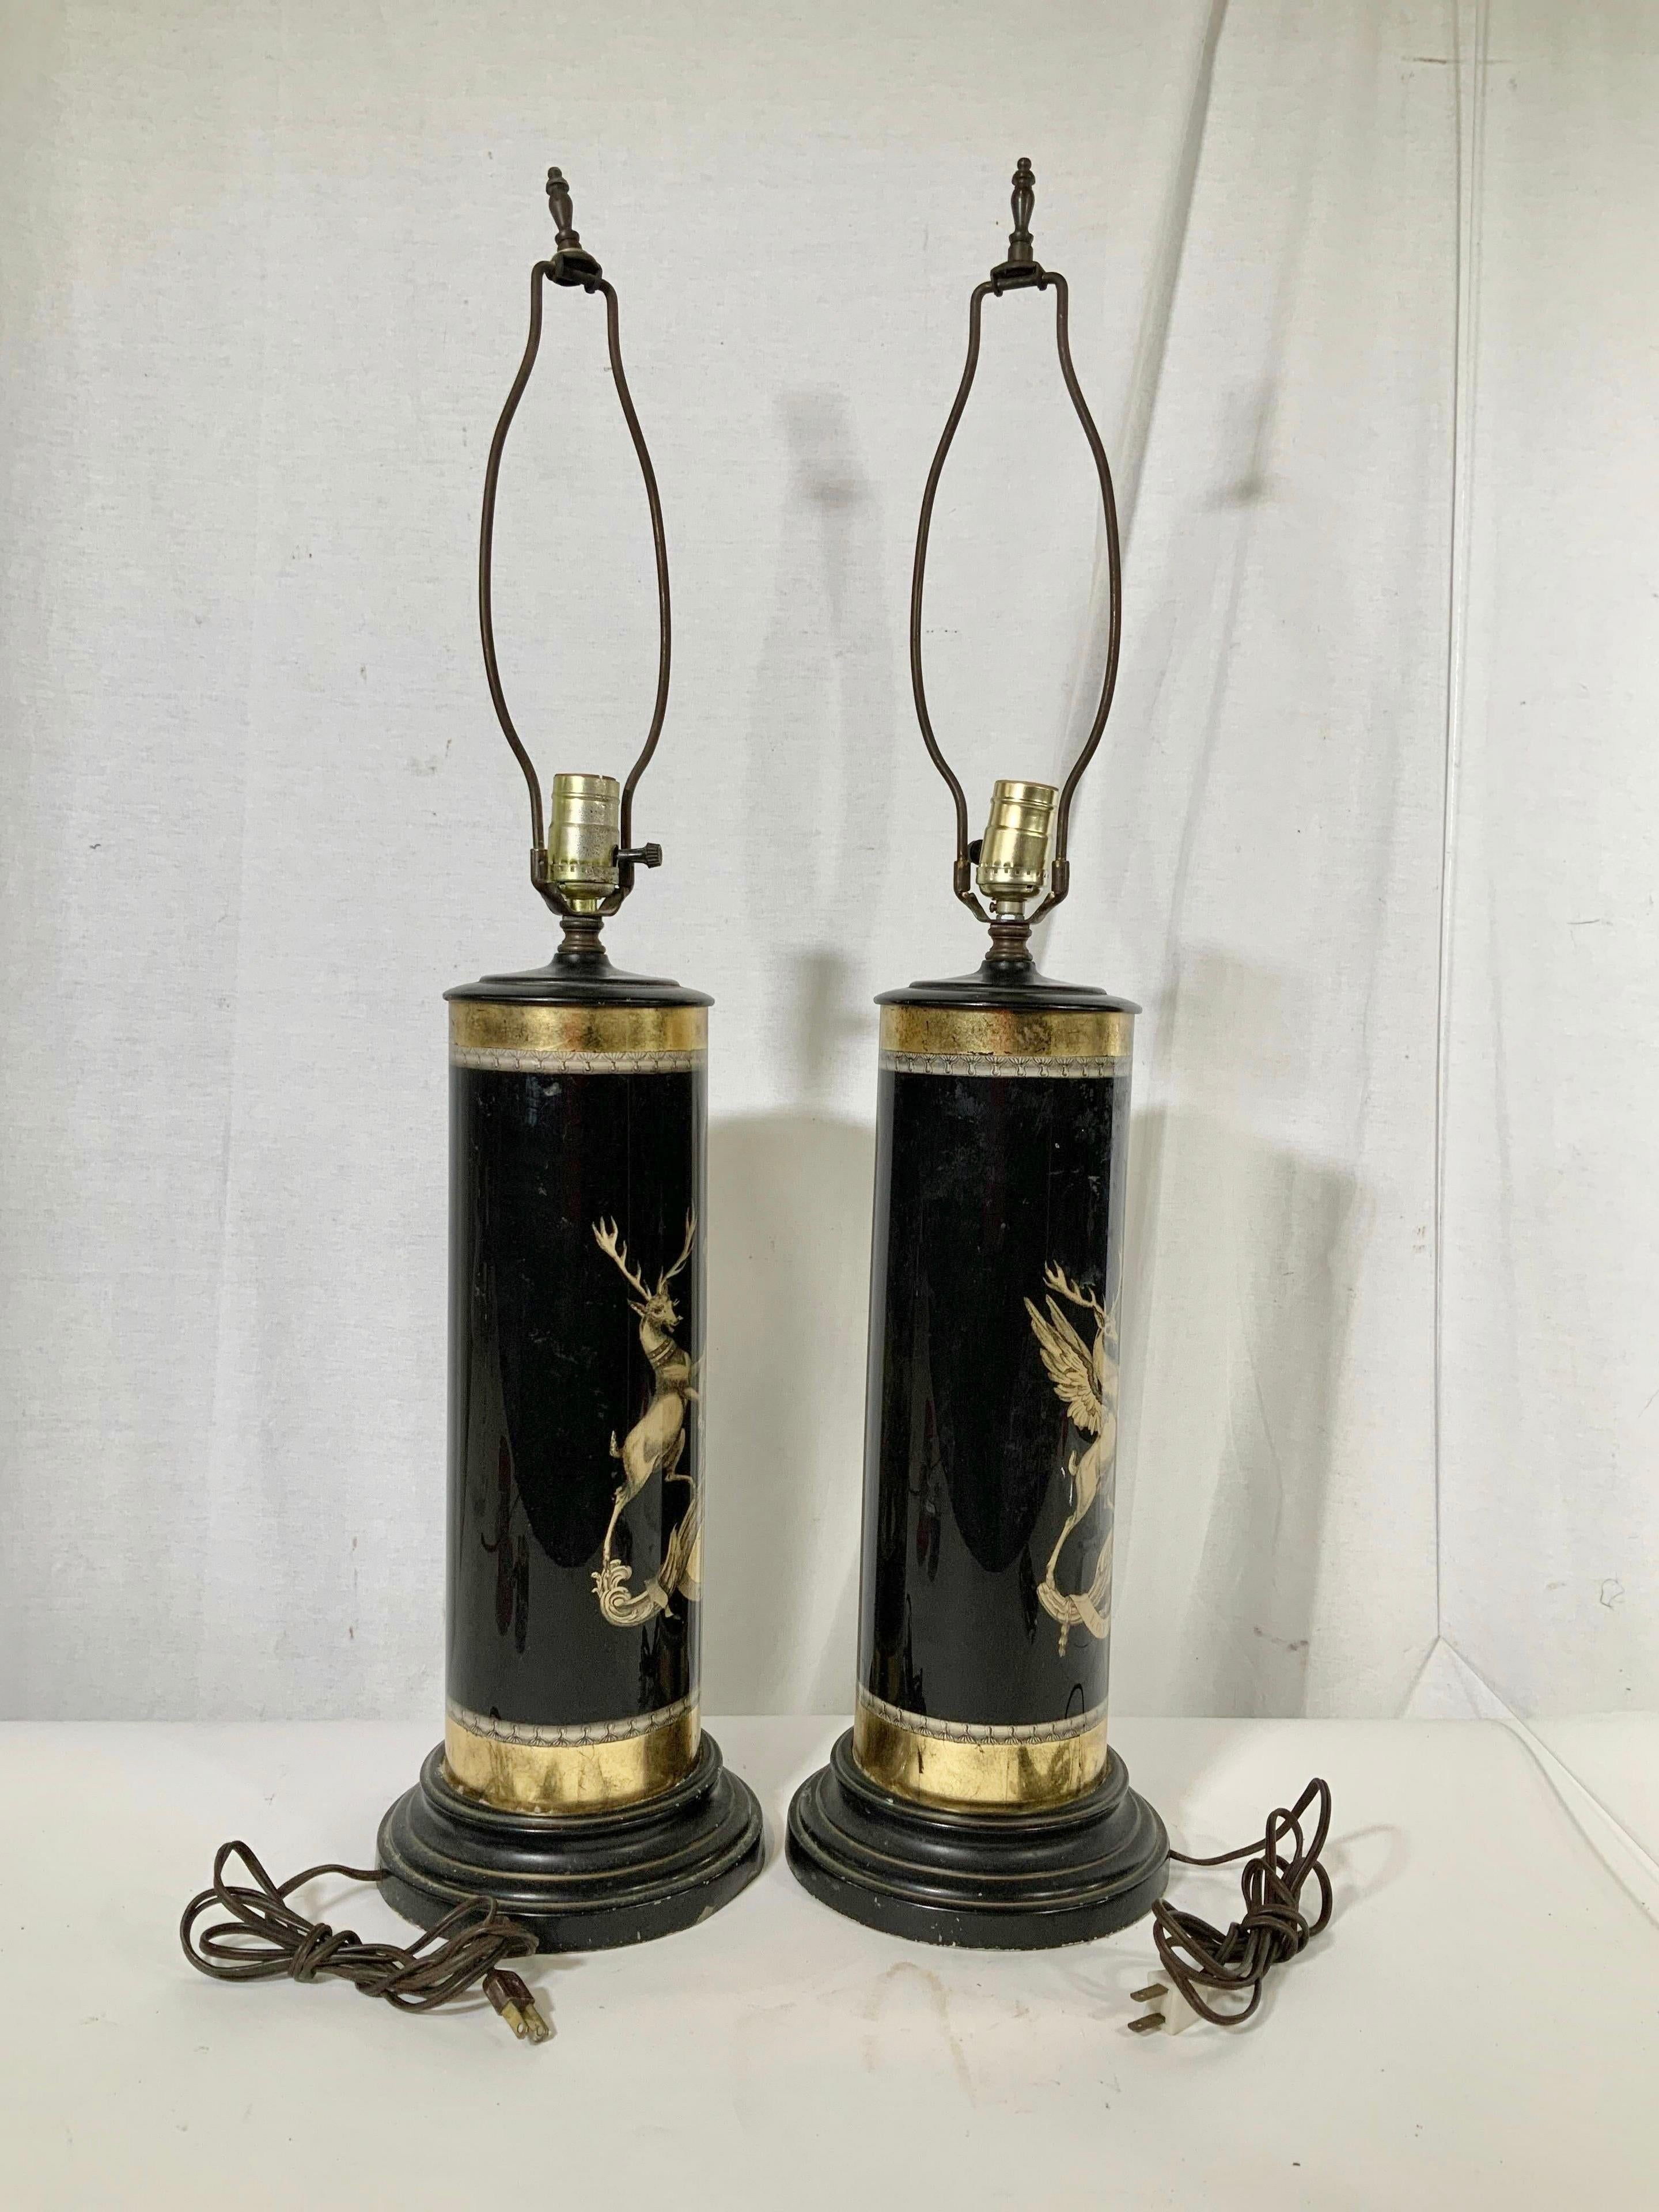 Pair of Verre Églomisé Lamps Coats of Arms for the Earls Bathurst and Granville For Sale 2